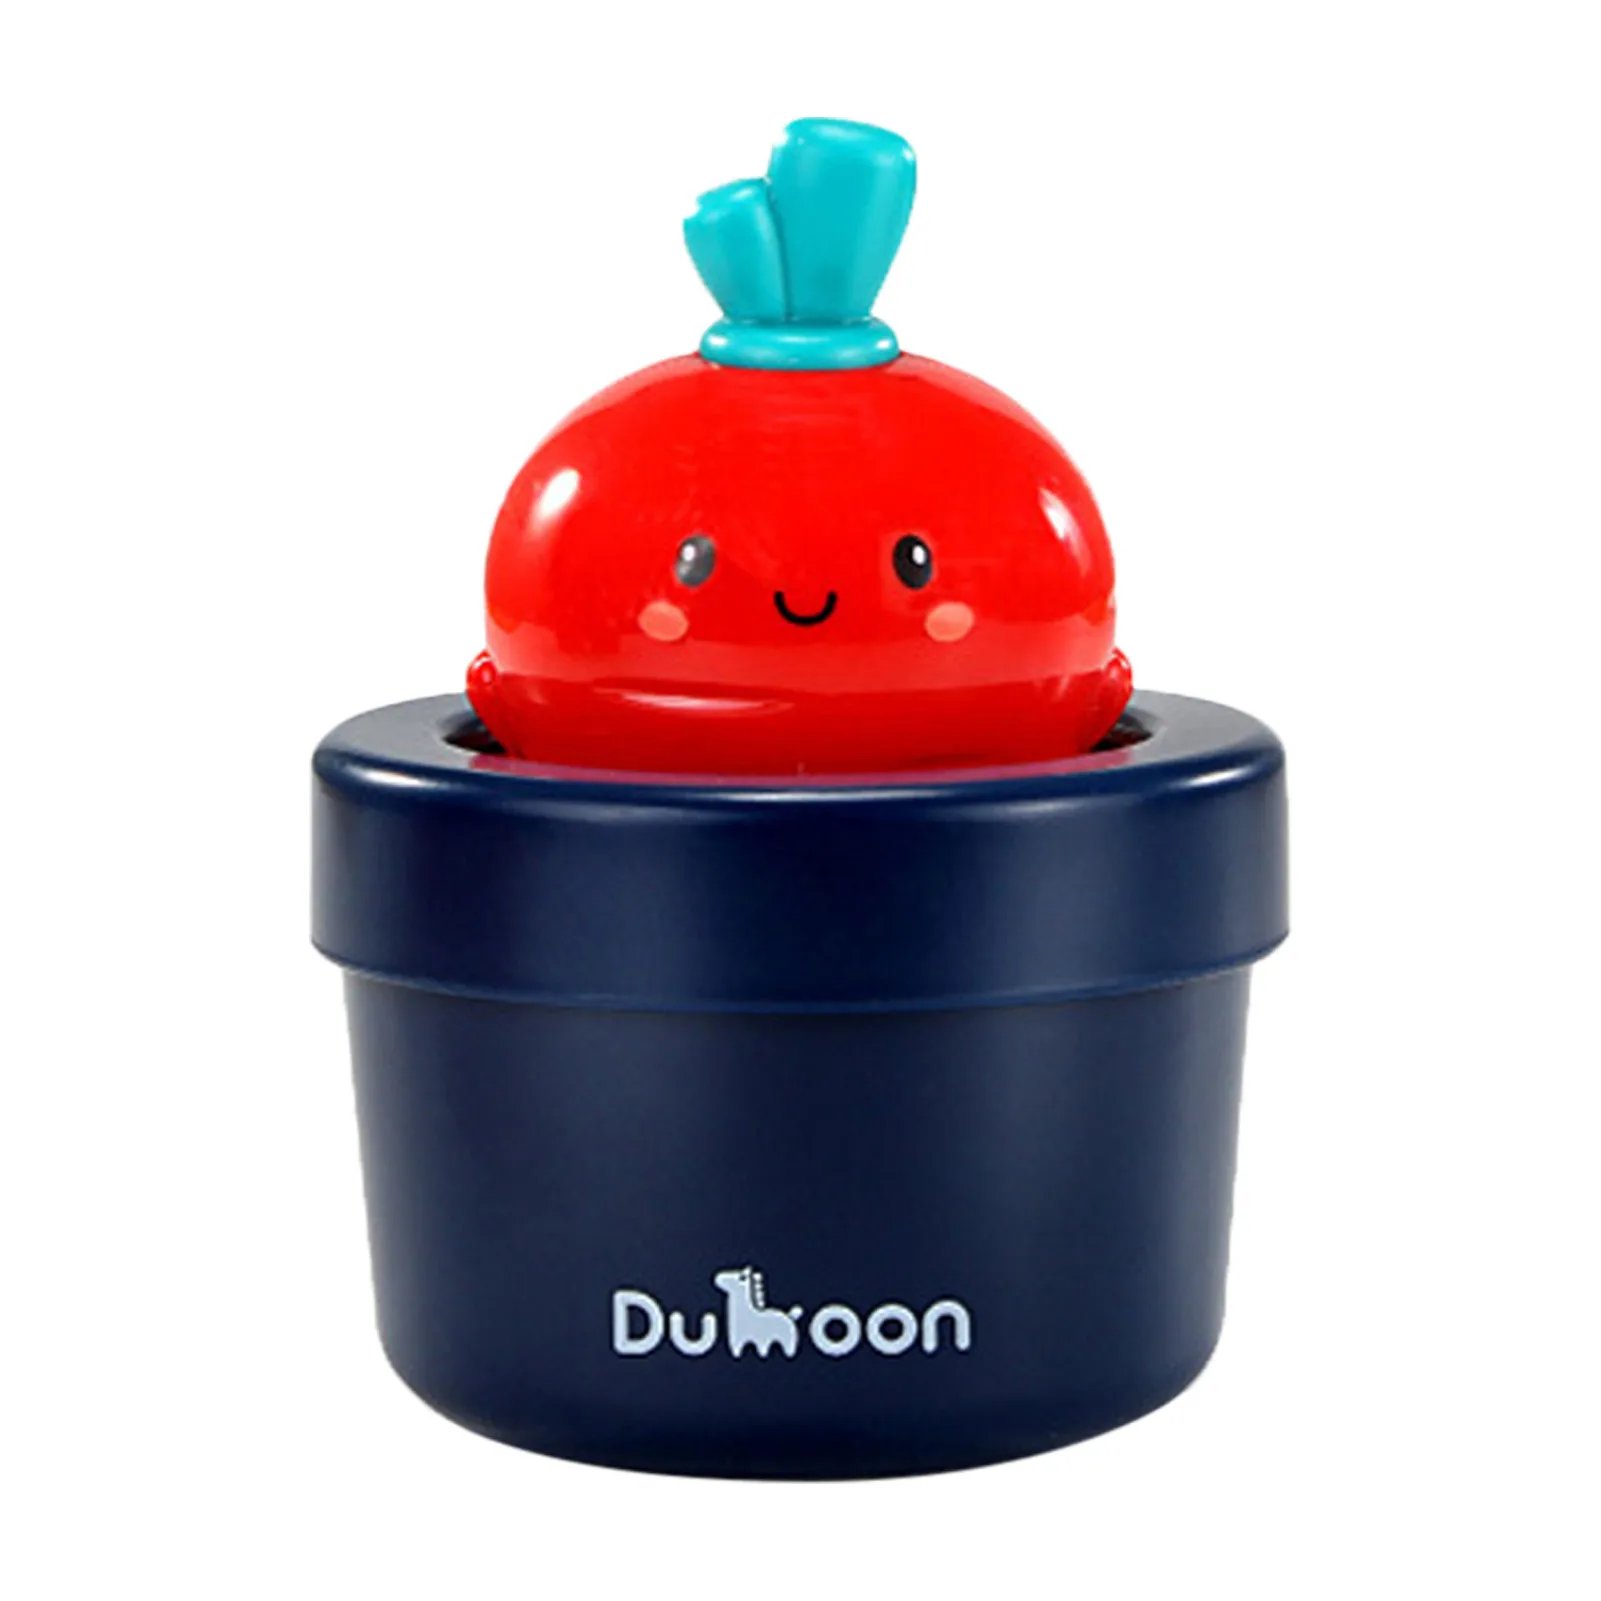 

1pcs Baby Shower Toys Cute Cartoon Mushrooms Flower Pot Classic Baby Water Toy Odorless Safe Plant Toy For Kids Gift 2020 Newest